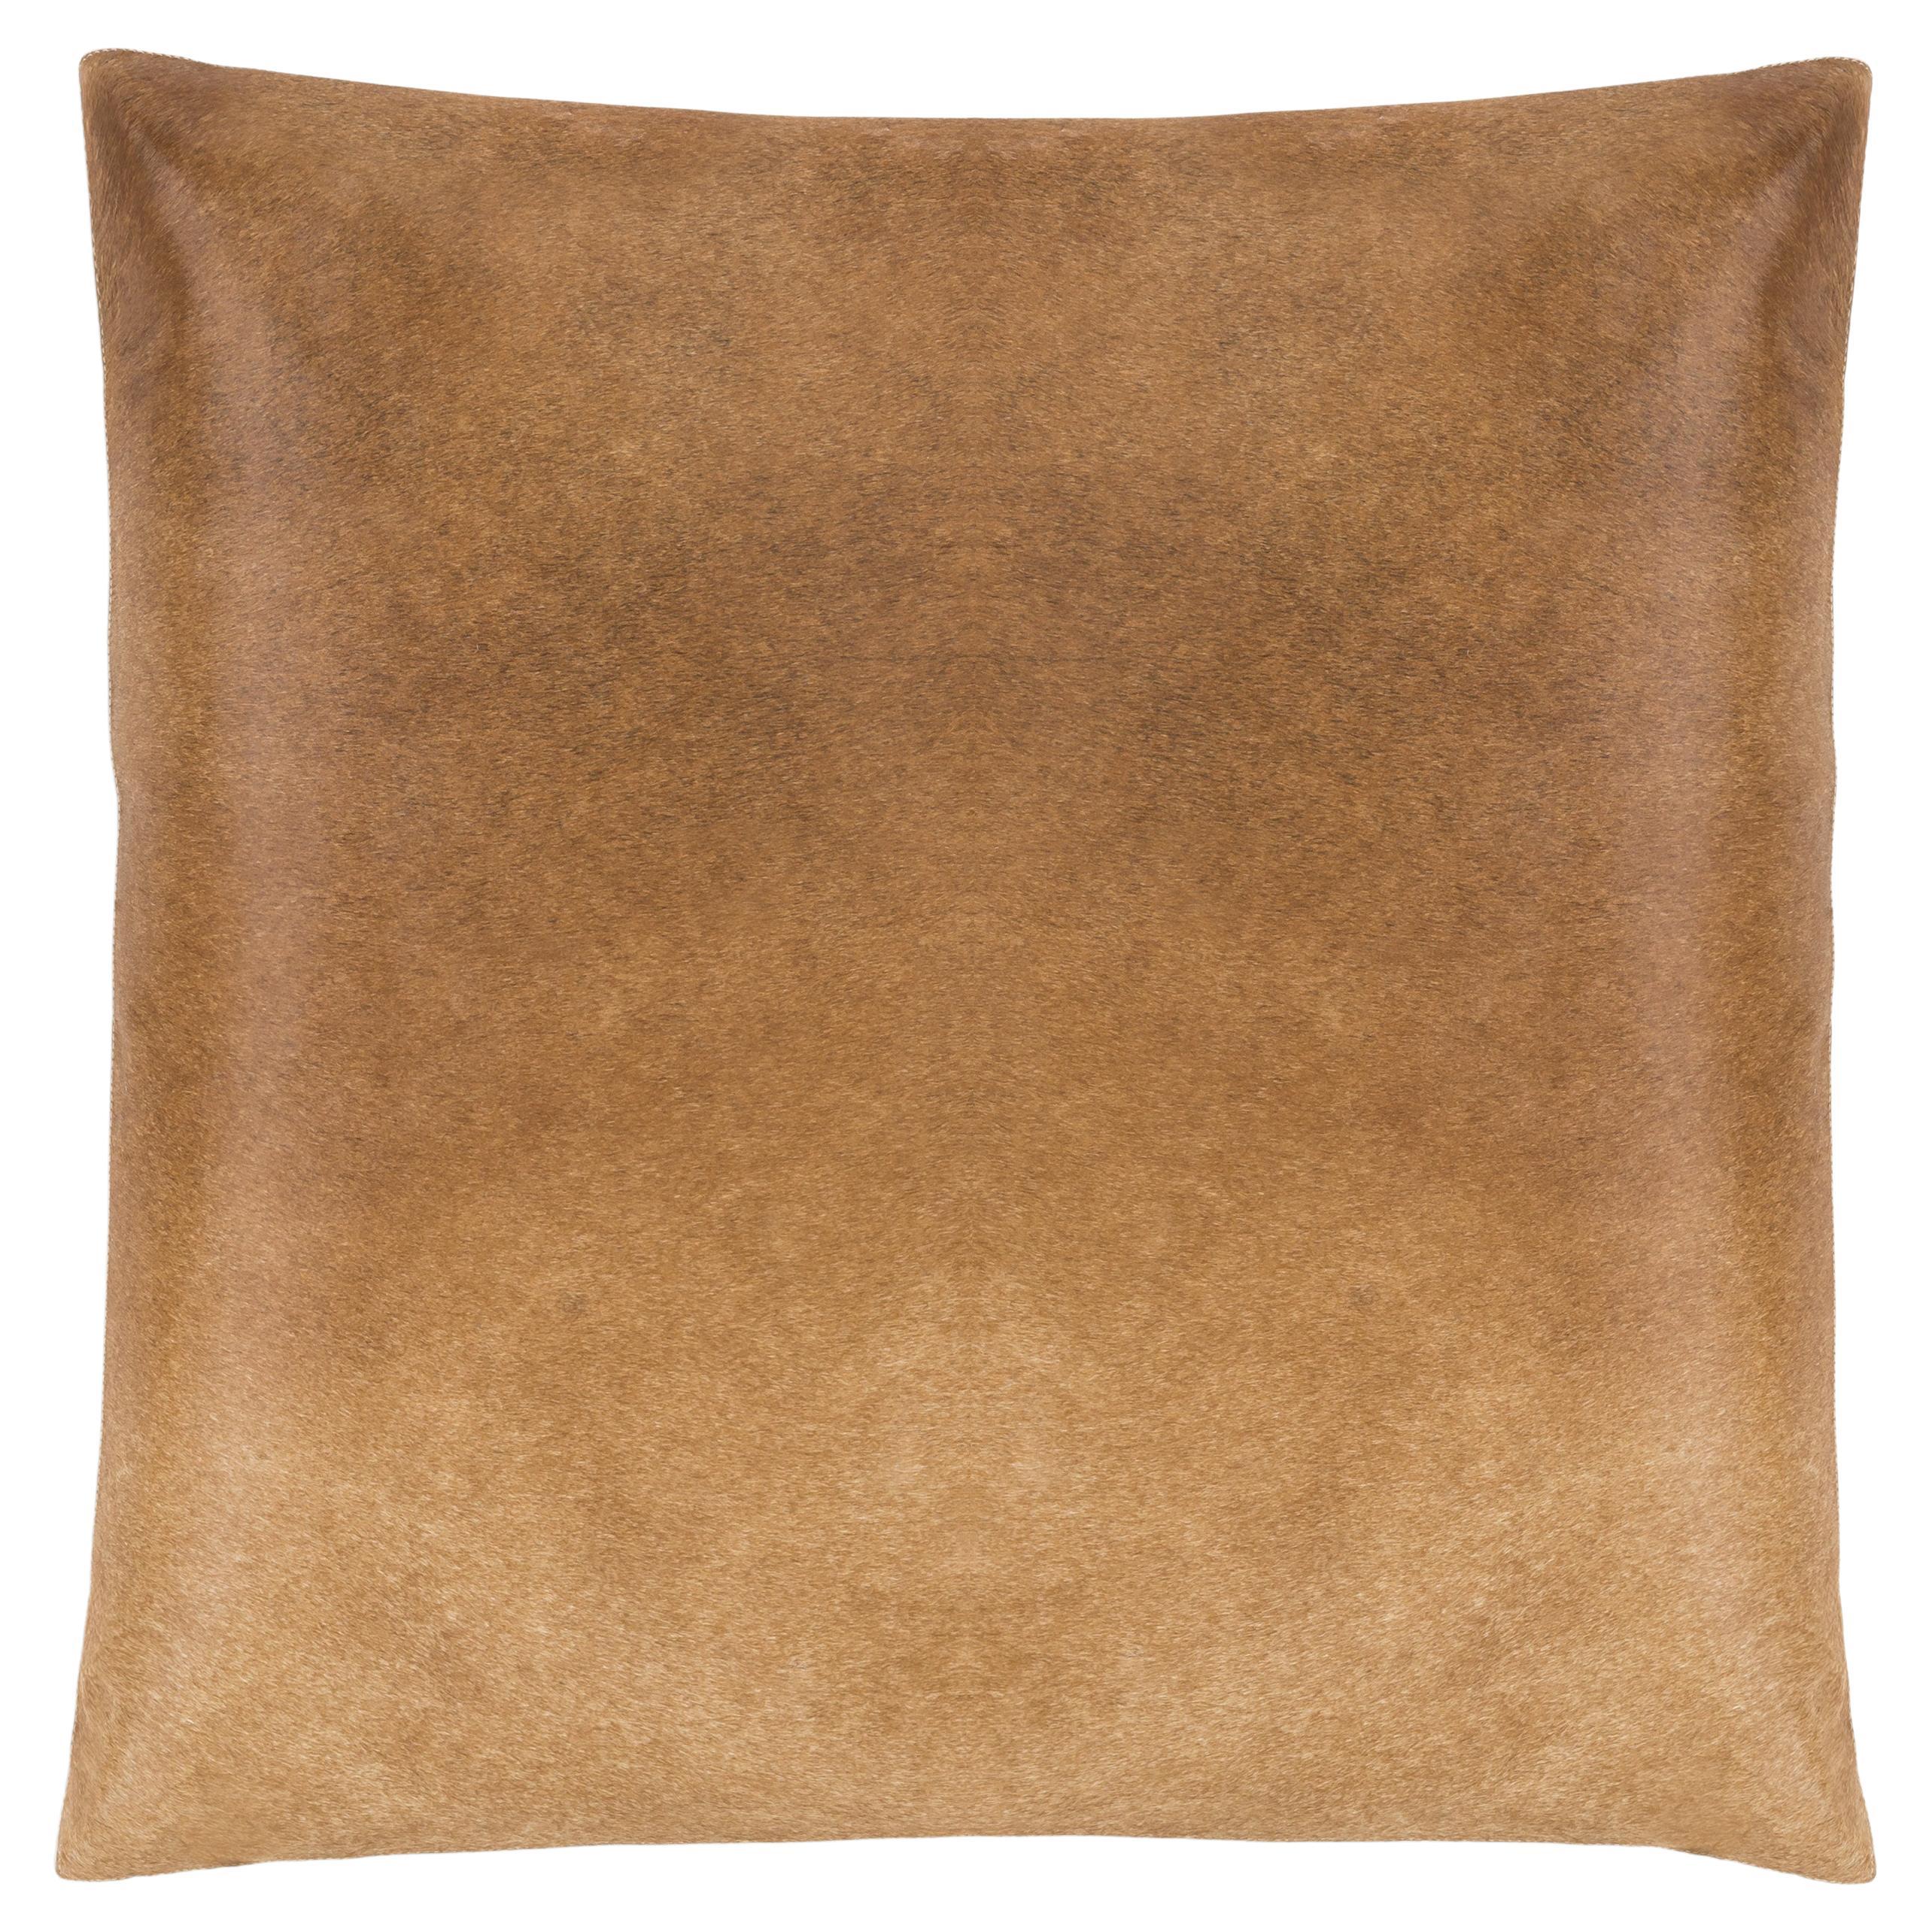 Lagos Sand Hide Pillow For Sale